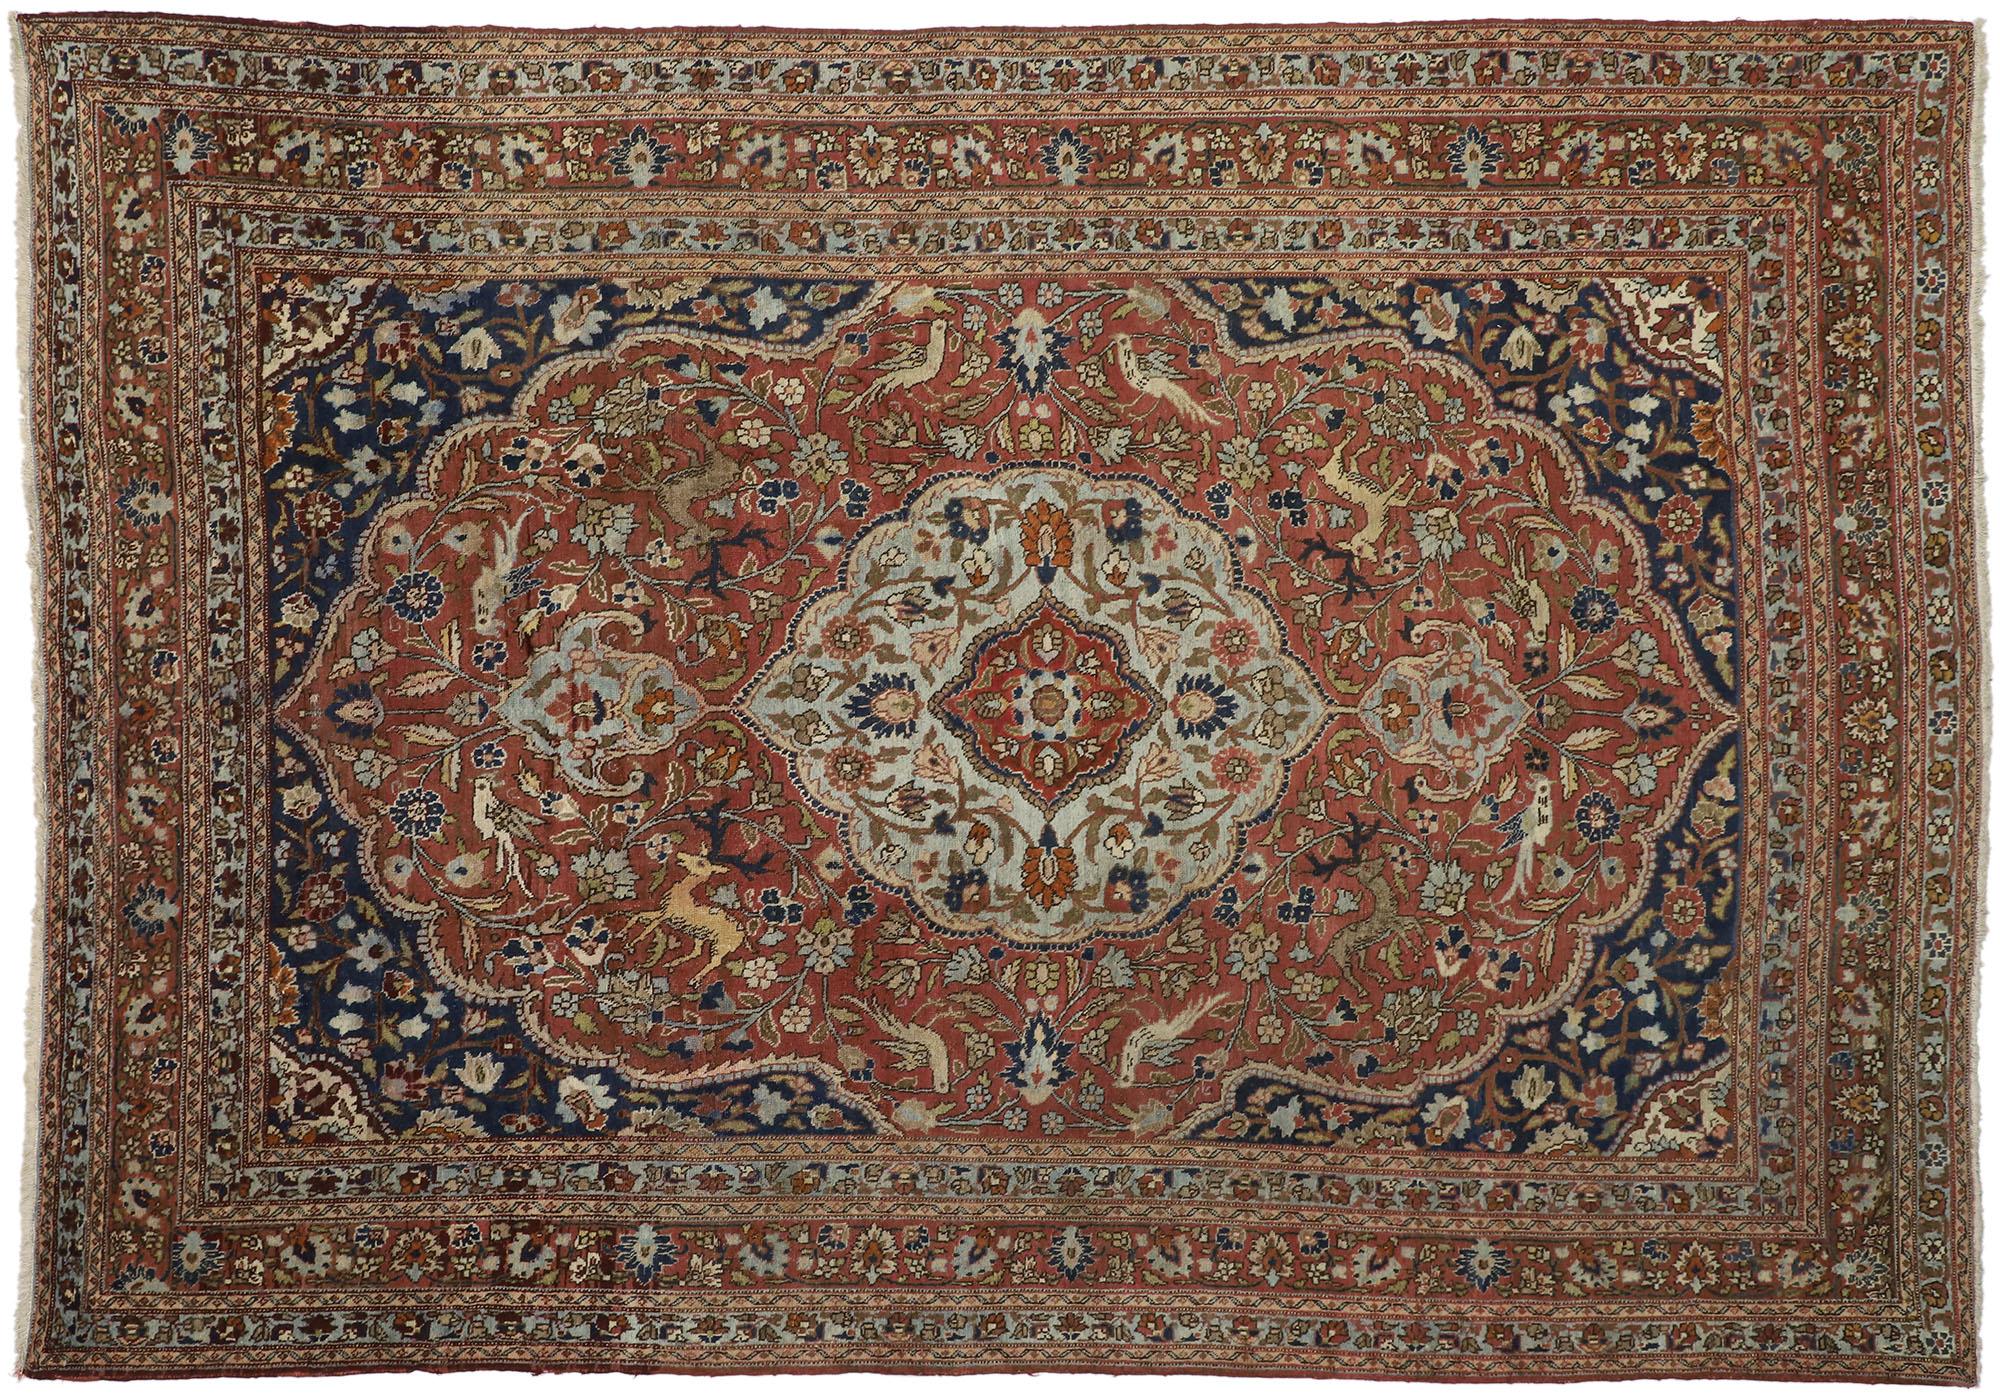 Antique Persian Tabriz Palace Size Rug with Arts & Crafts Renaissance Style For Sale 3